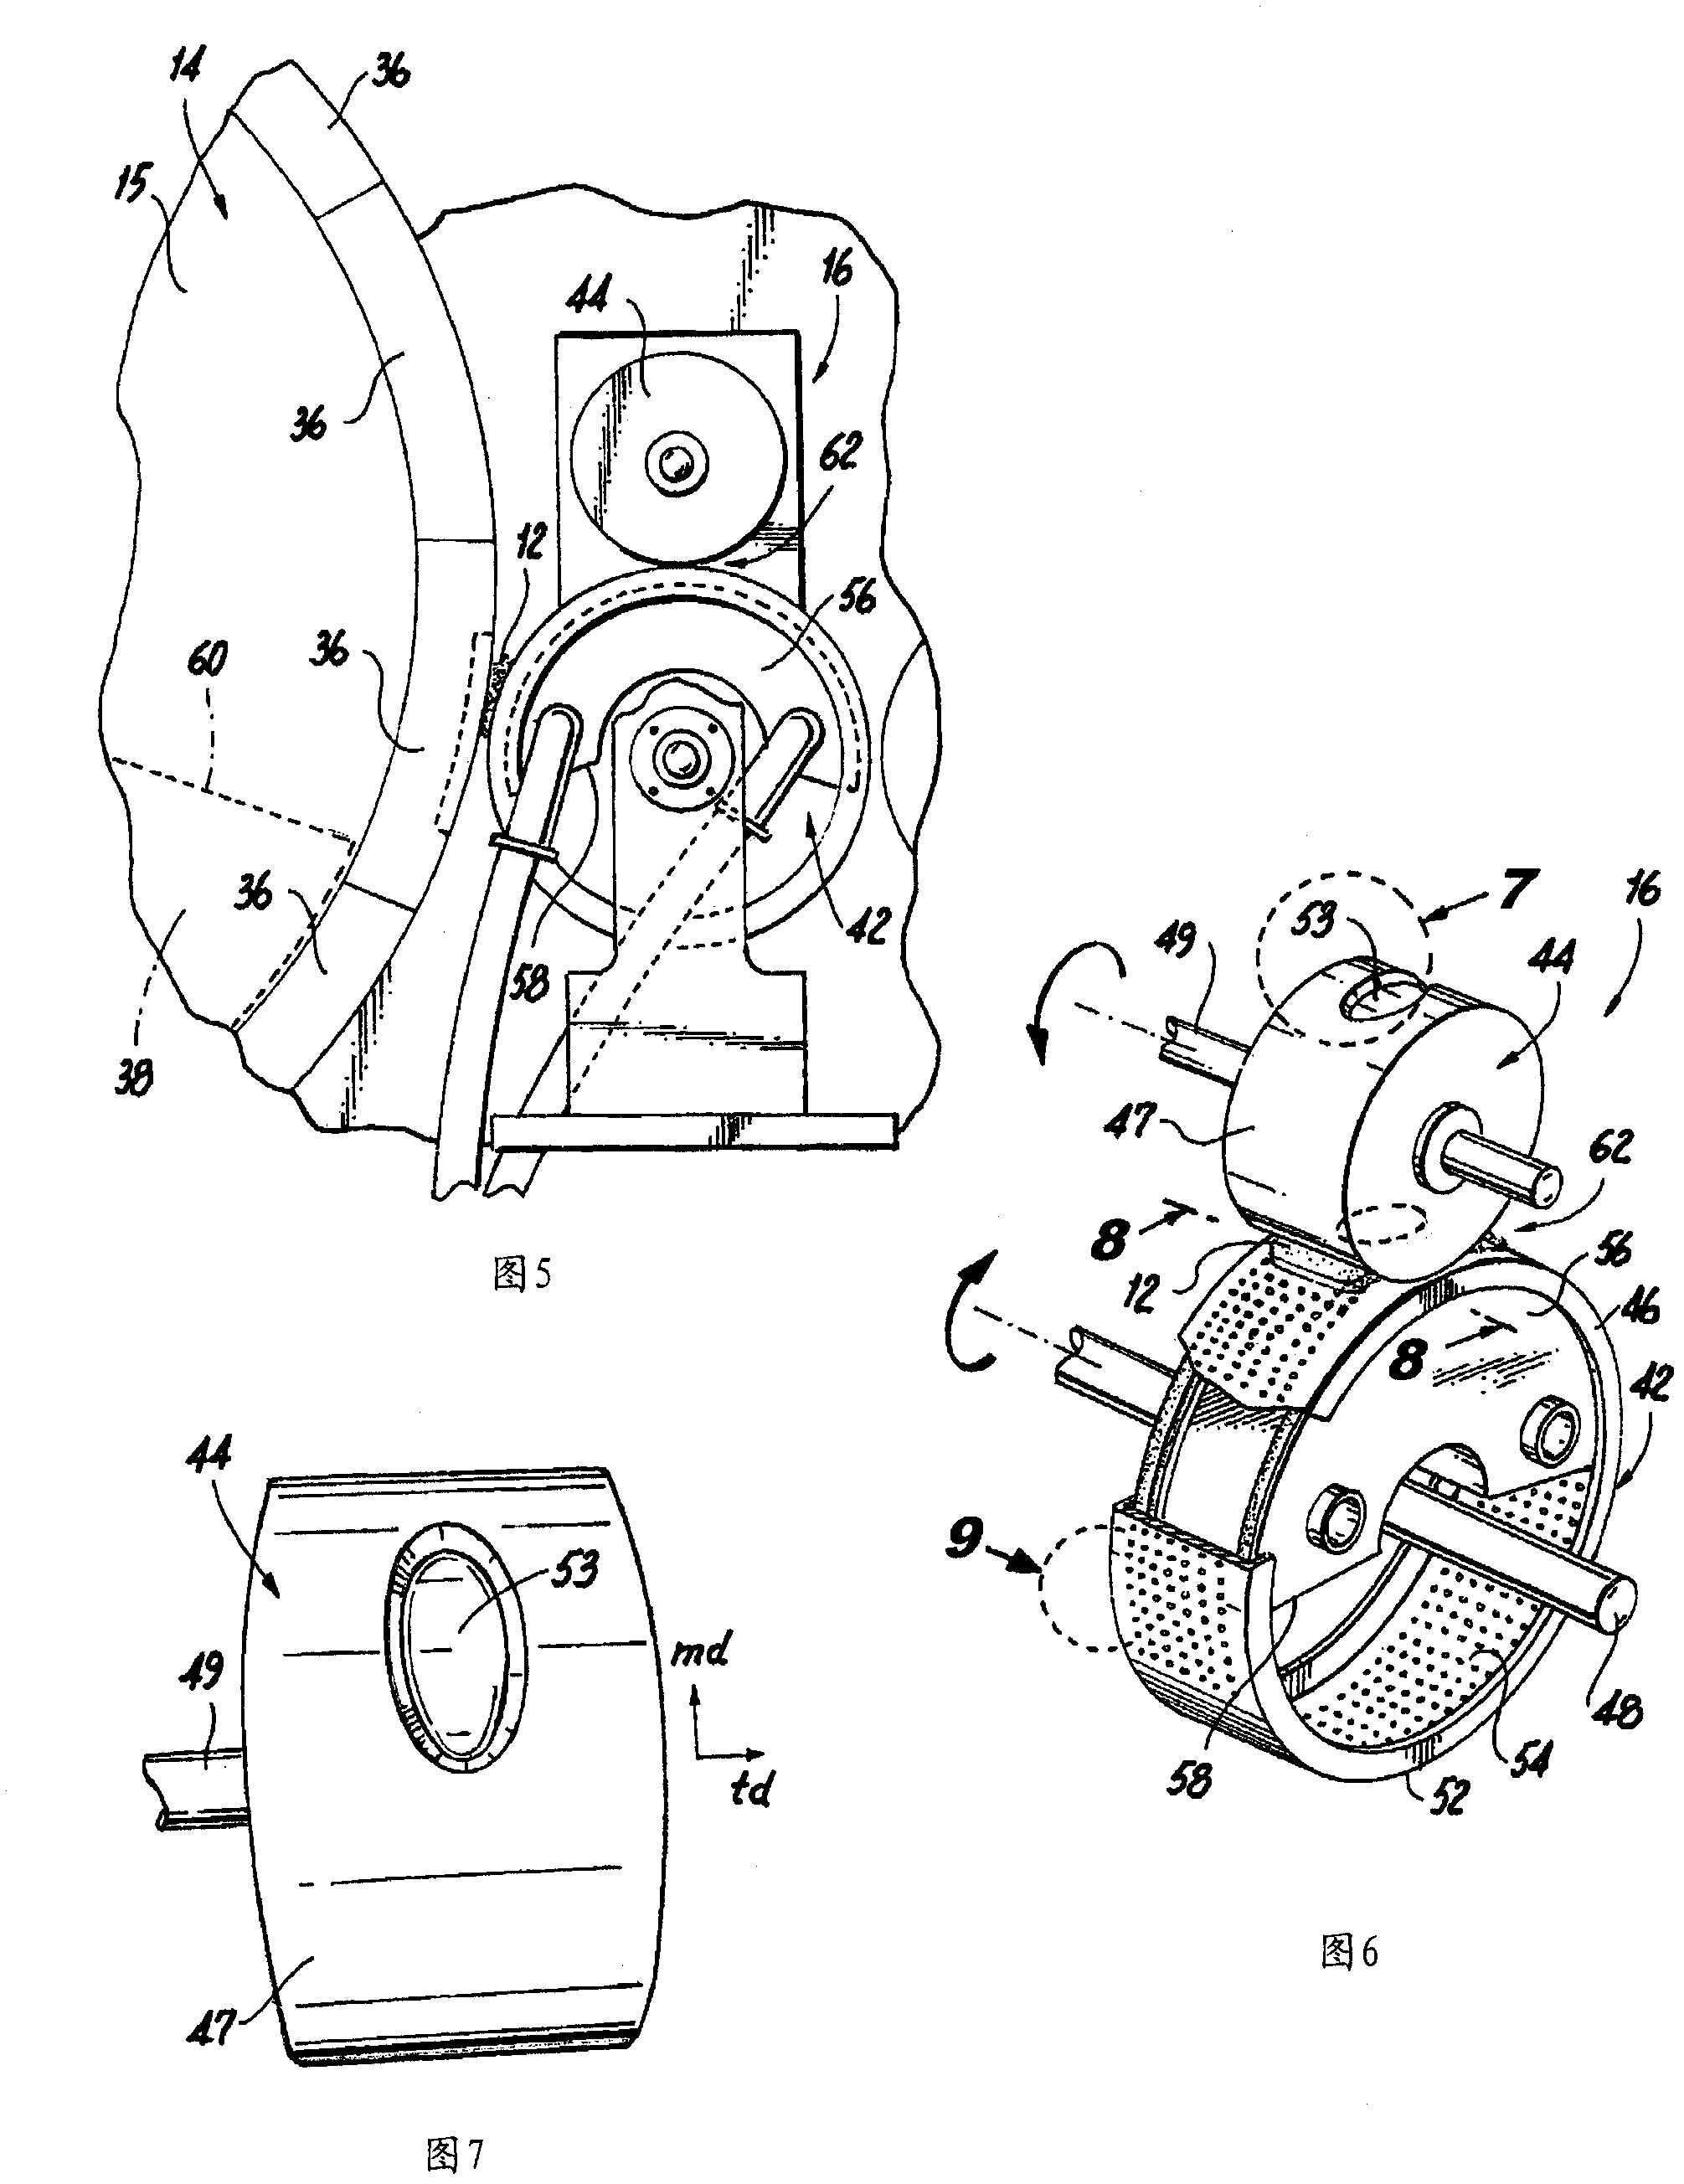 Apparatus for making a fibrous article having a three dimensional profile